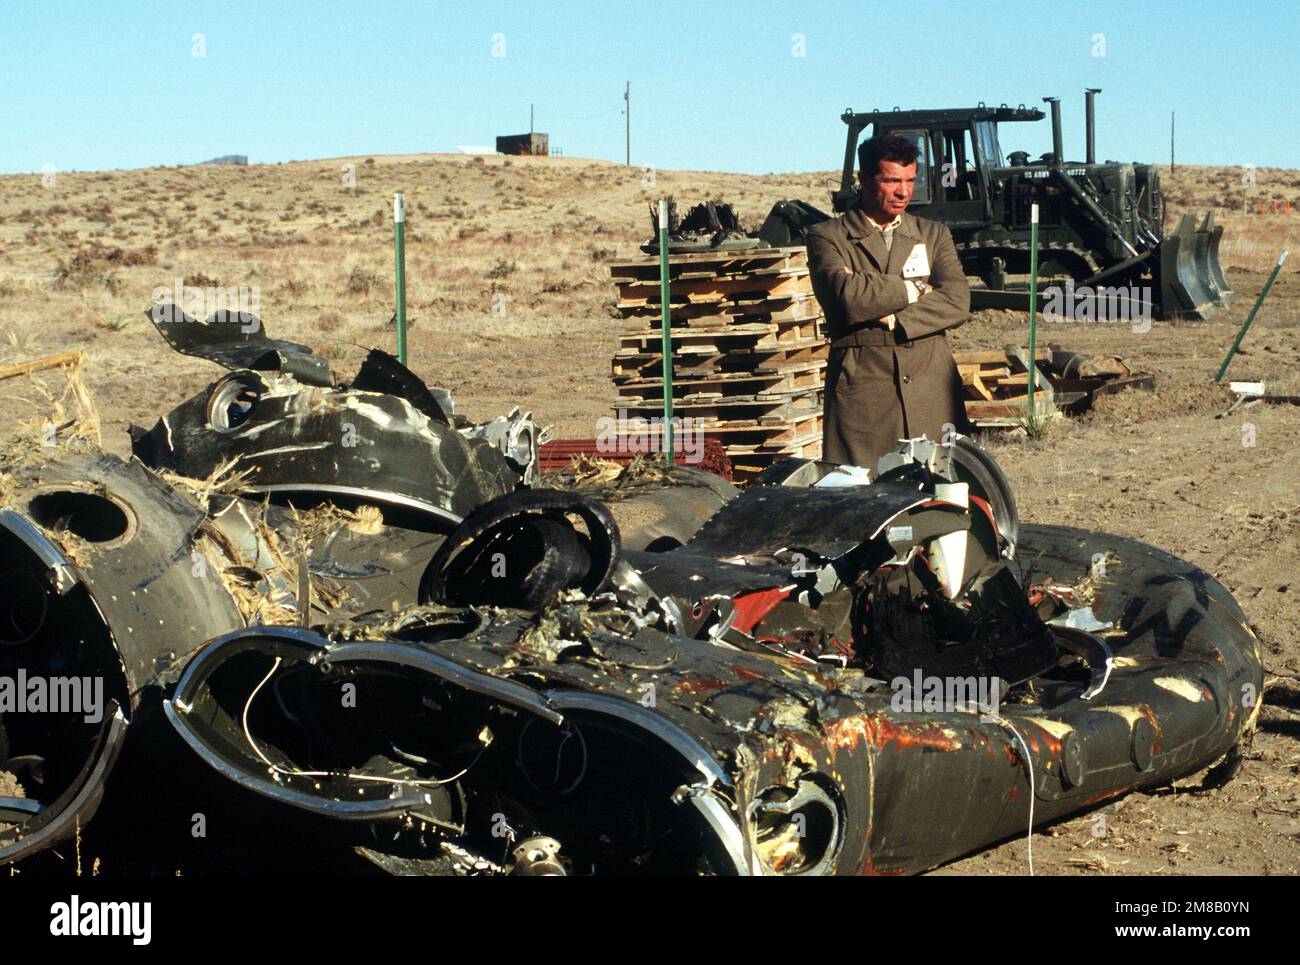 A Soviet inspector stands beside the mangled remnants of two Pershing II missile stages. Several missiles are being destroyed in the presence of Soviet inspectors in accordance with the Intermediate-Range Nuclear Forces (INF) Treaty. Base: Pueblo Army Depot Activity State: Colorado (CO) Country: United States Of America (USA) Stock Photo